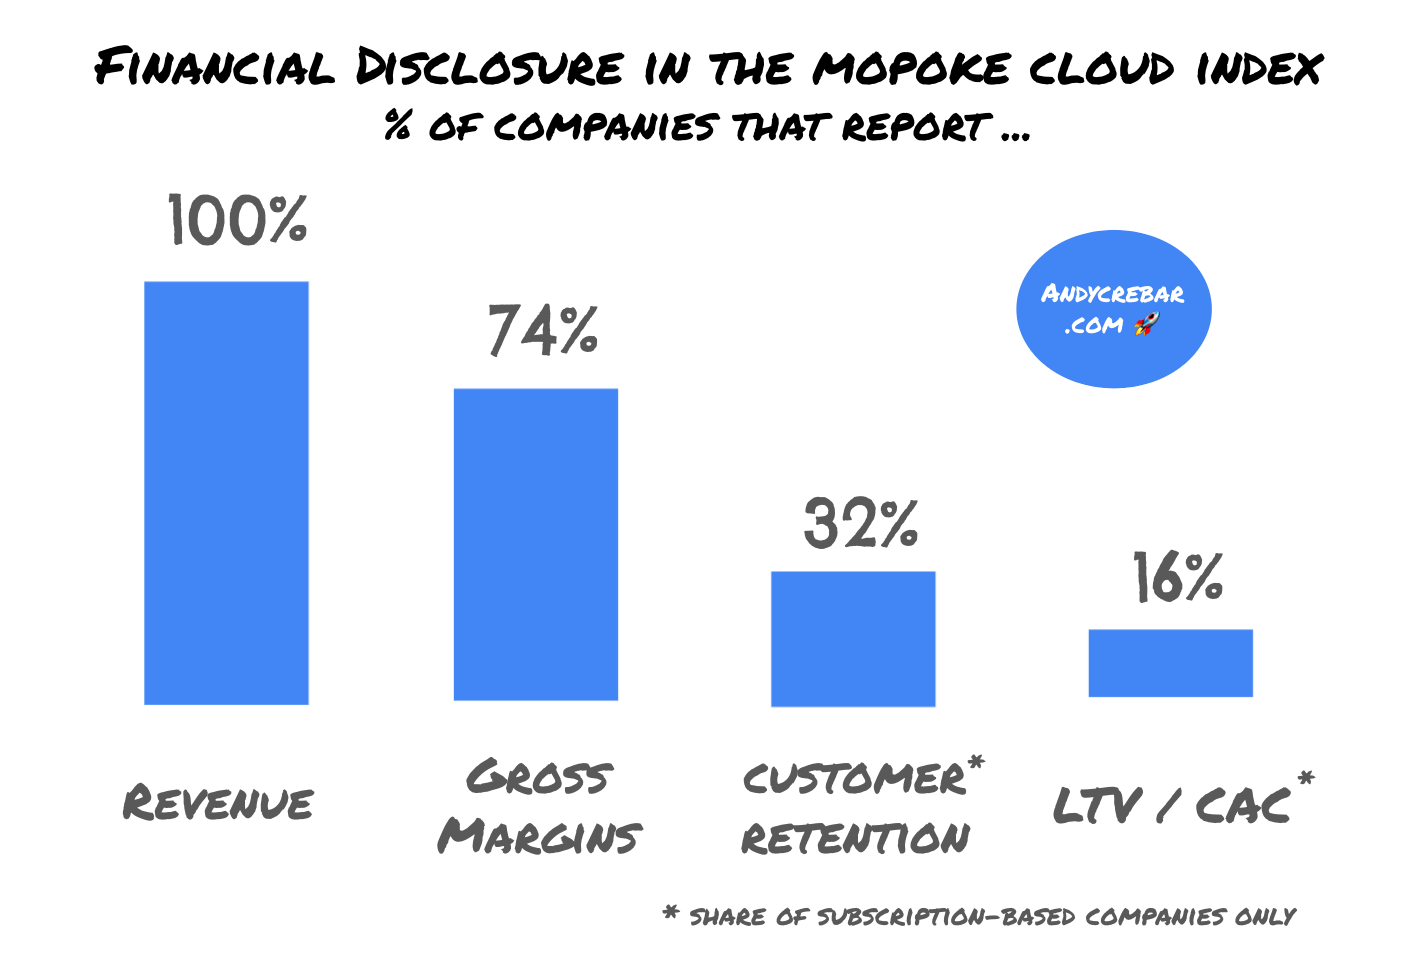 Financial disclosure levels in the Mopoke Cloud index - revenue, gross margin, retention, LTV/ CAC